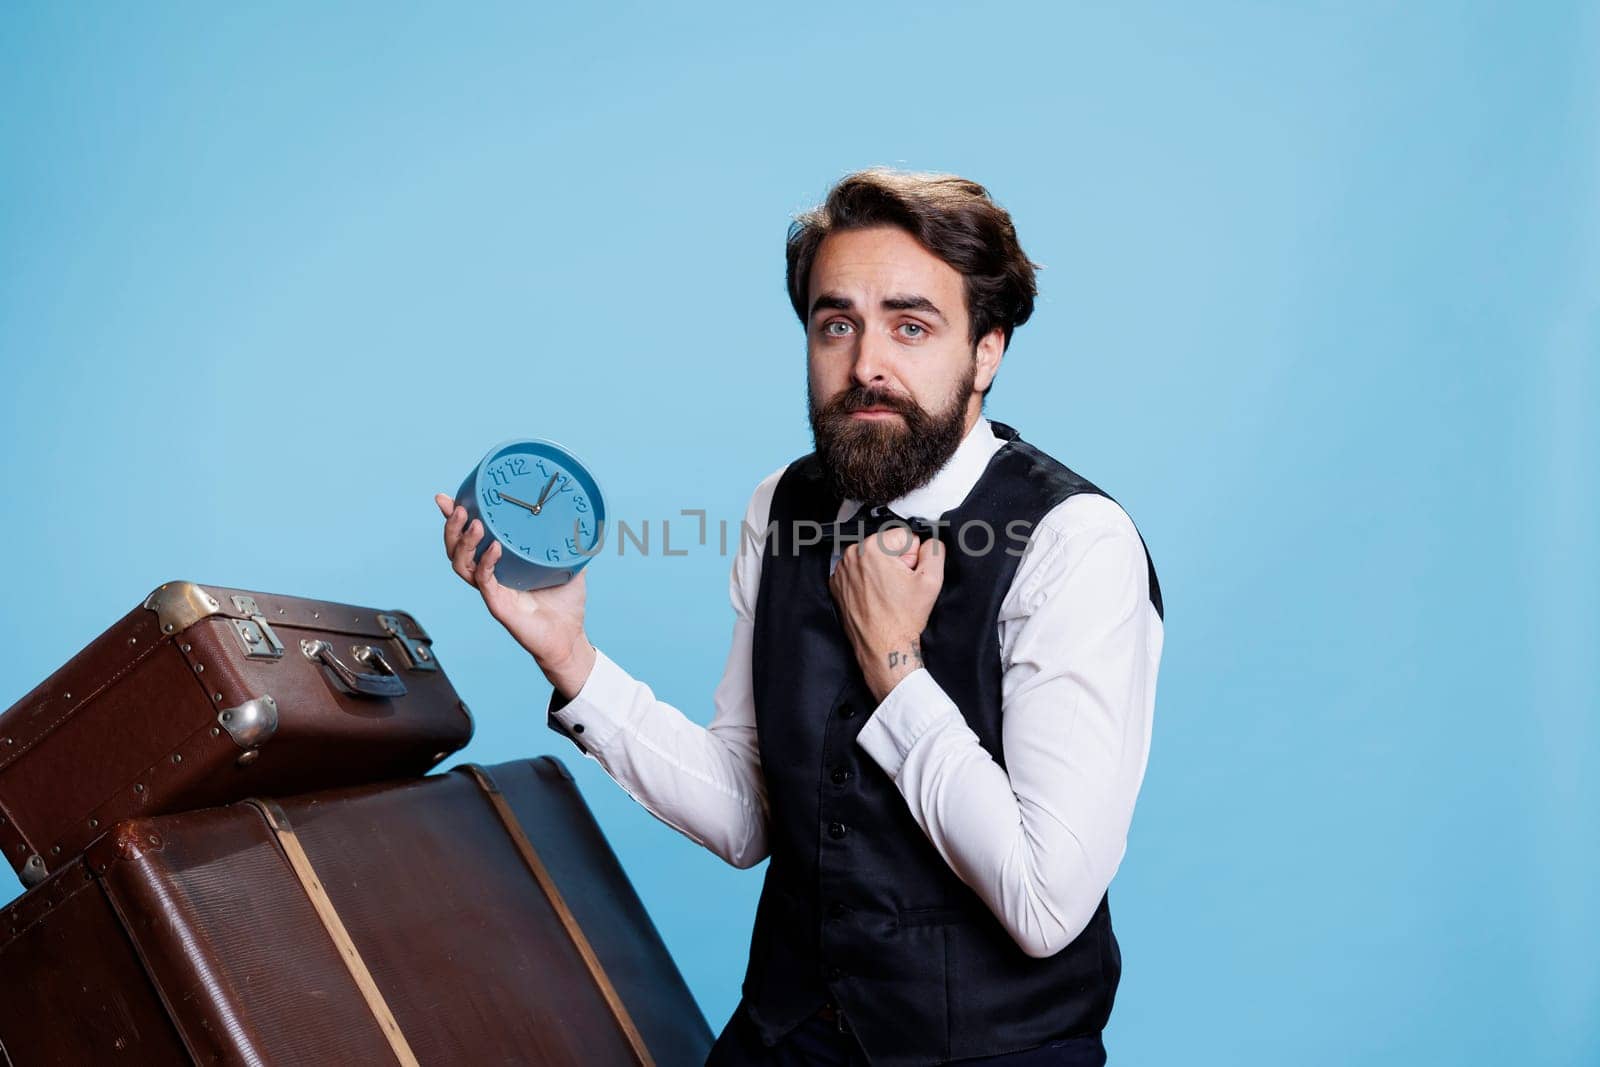 Classy bellboy uses clock to see time by DCStudio